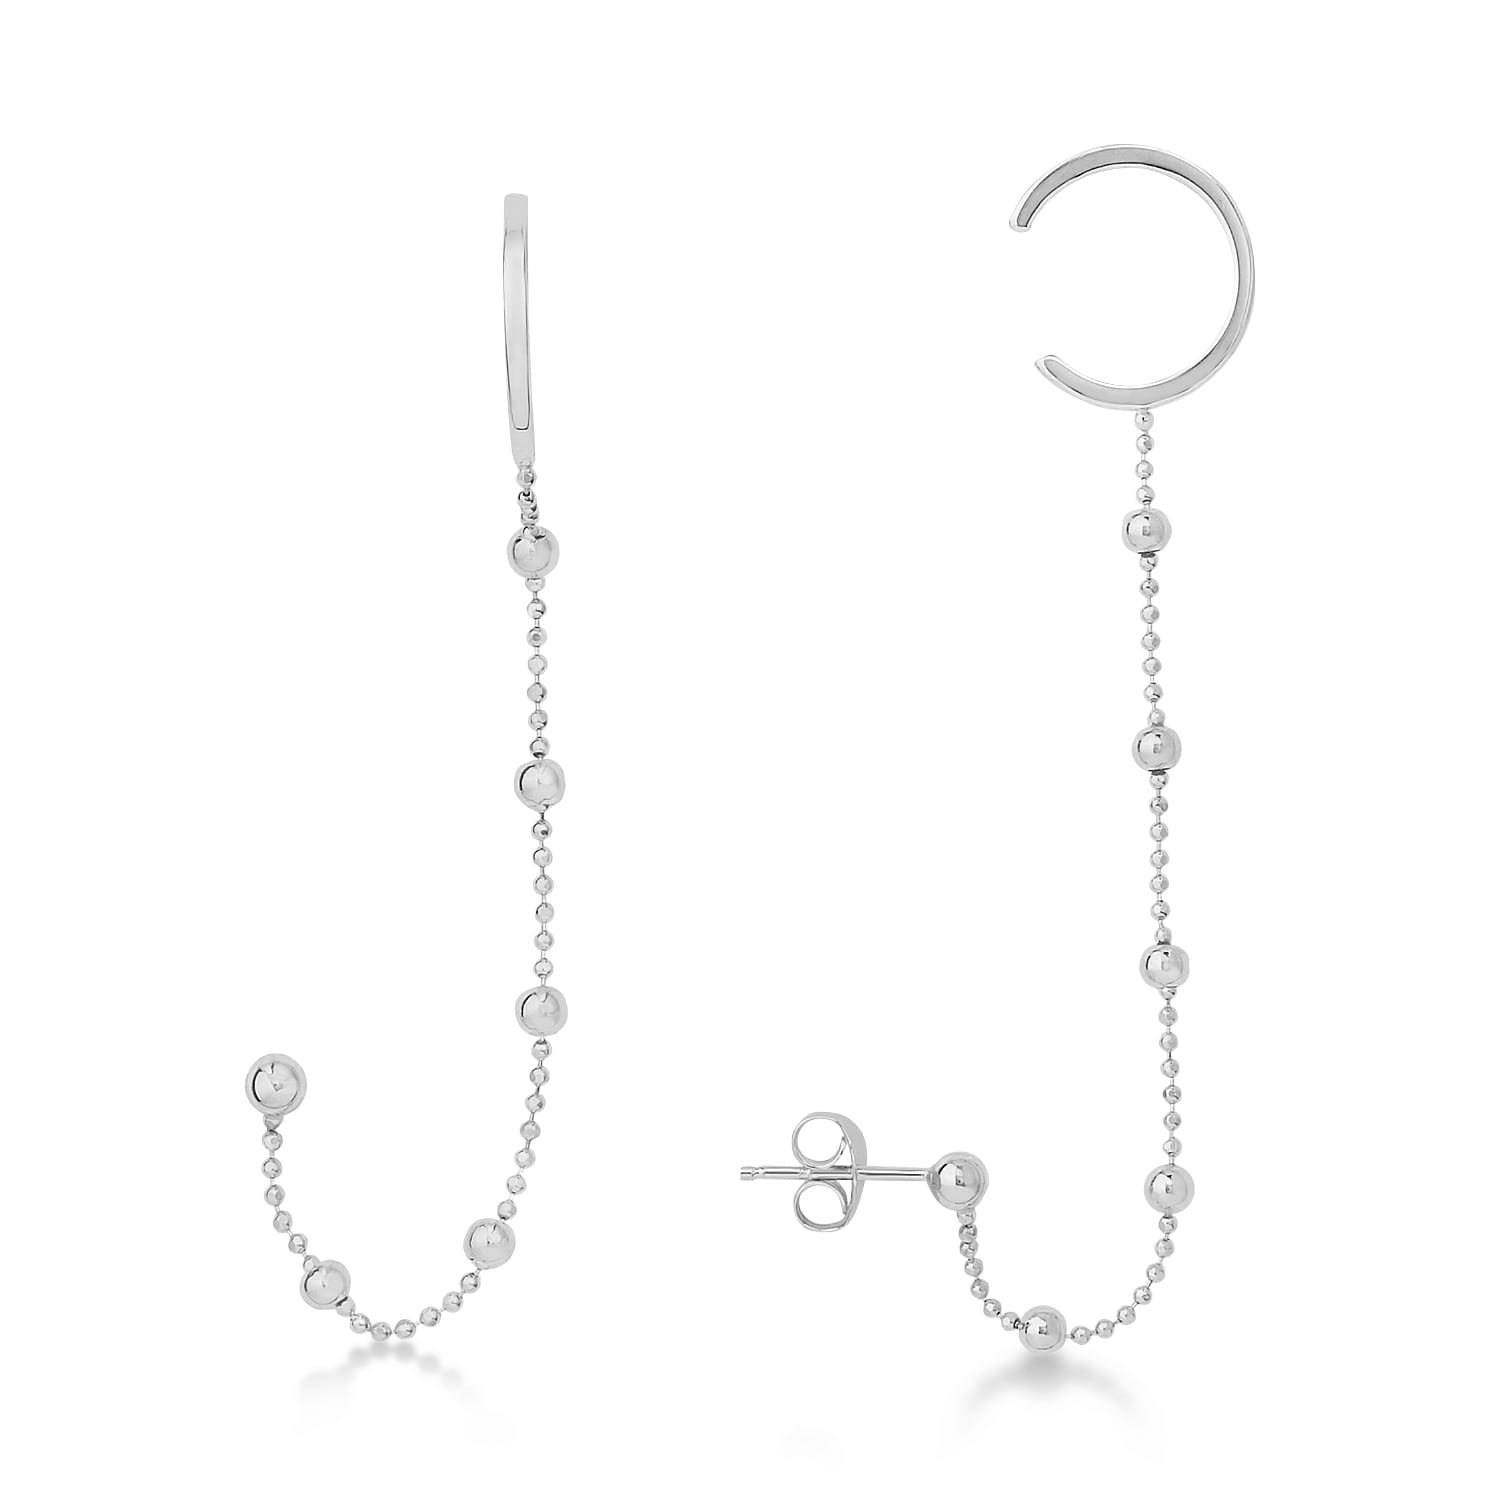 Beaded Dangling Earrings With Cuff 14k White Gold